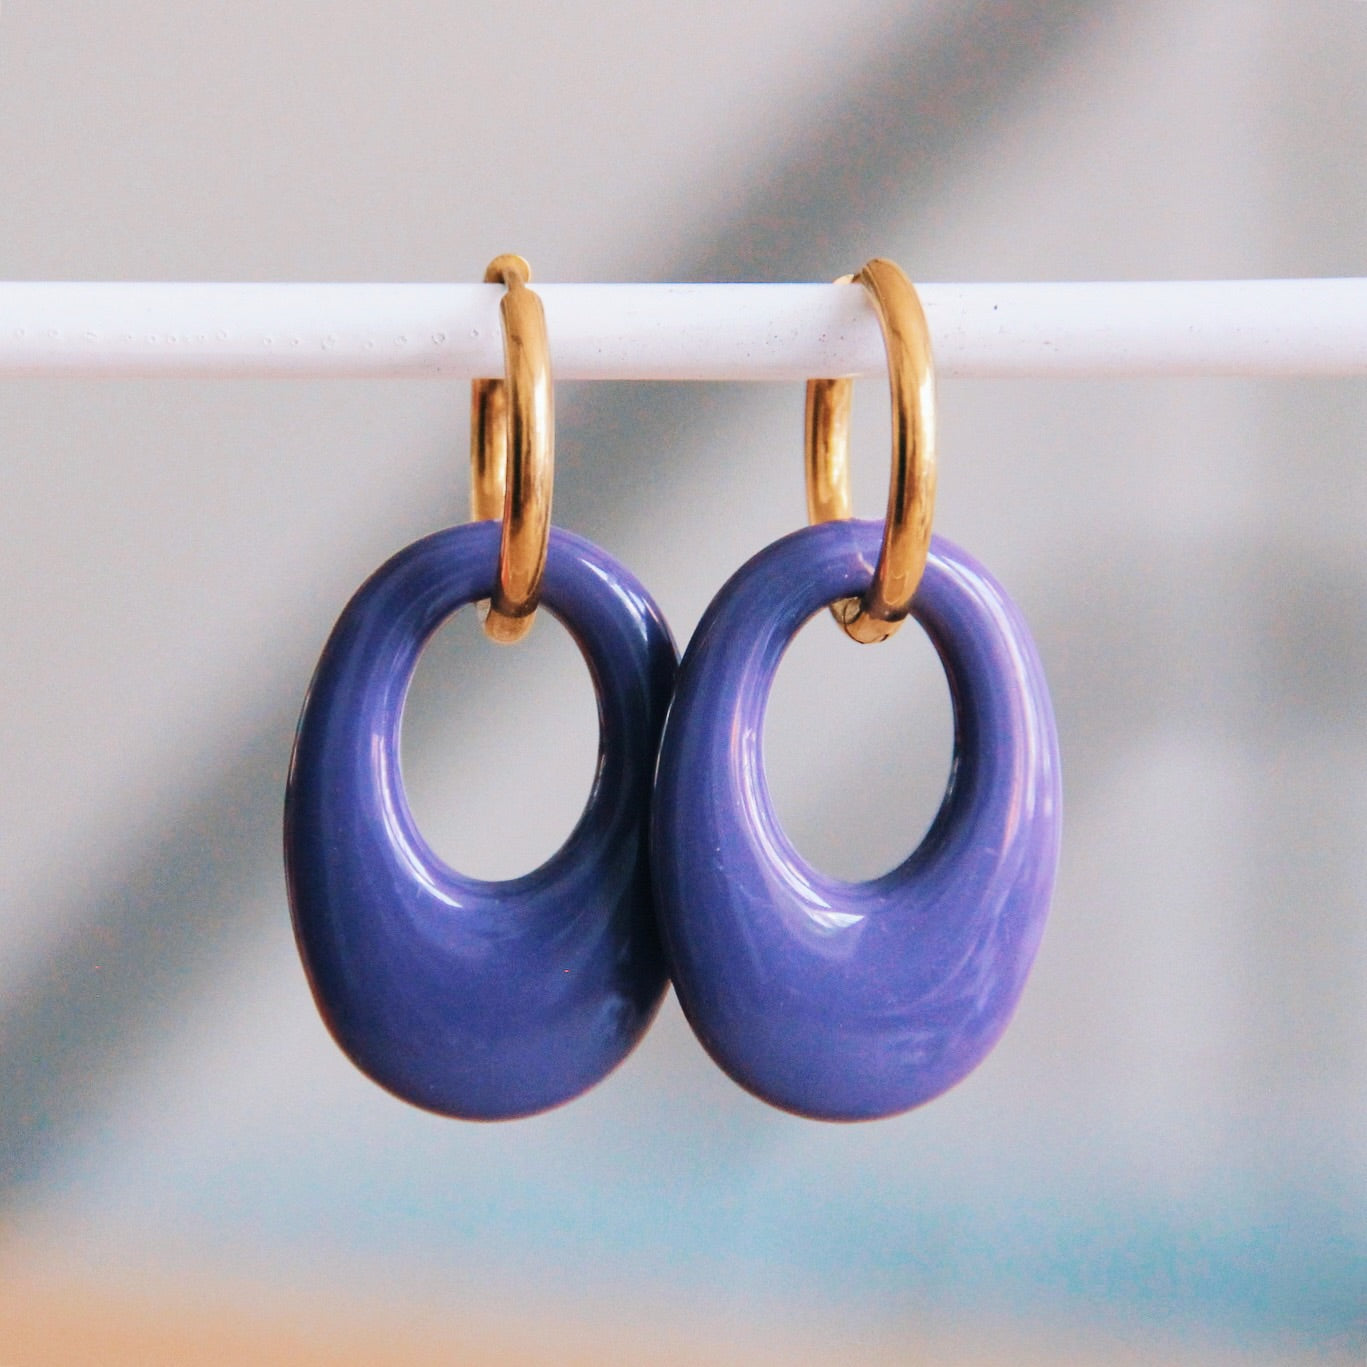 Stainless steel earring with resin drop  - Purple/Gold - SO7114